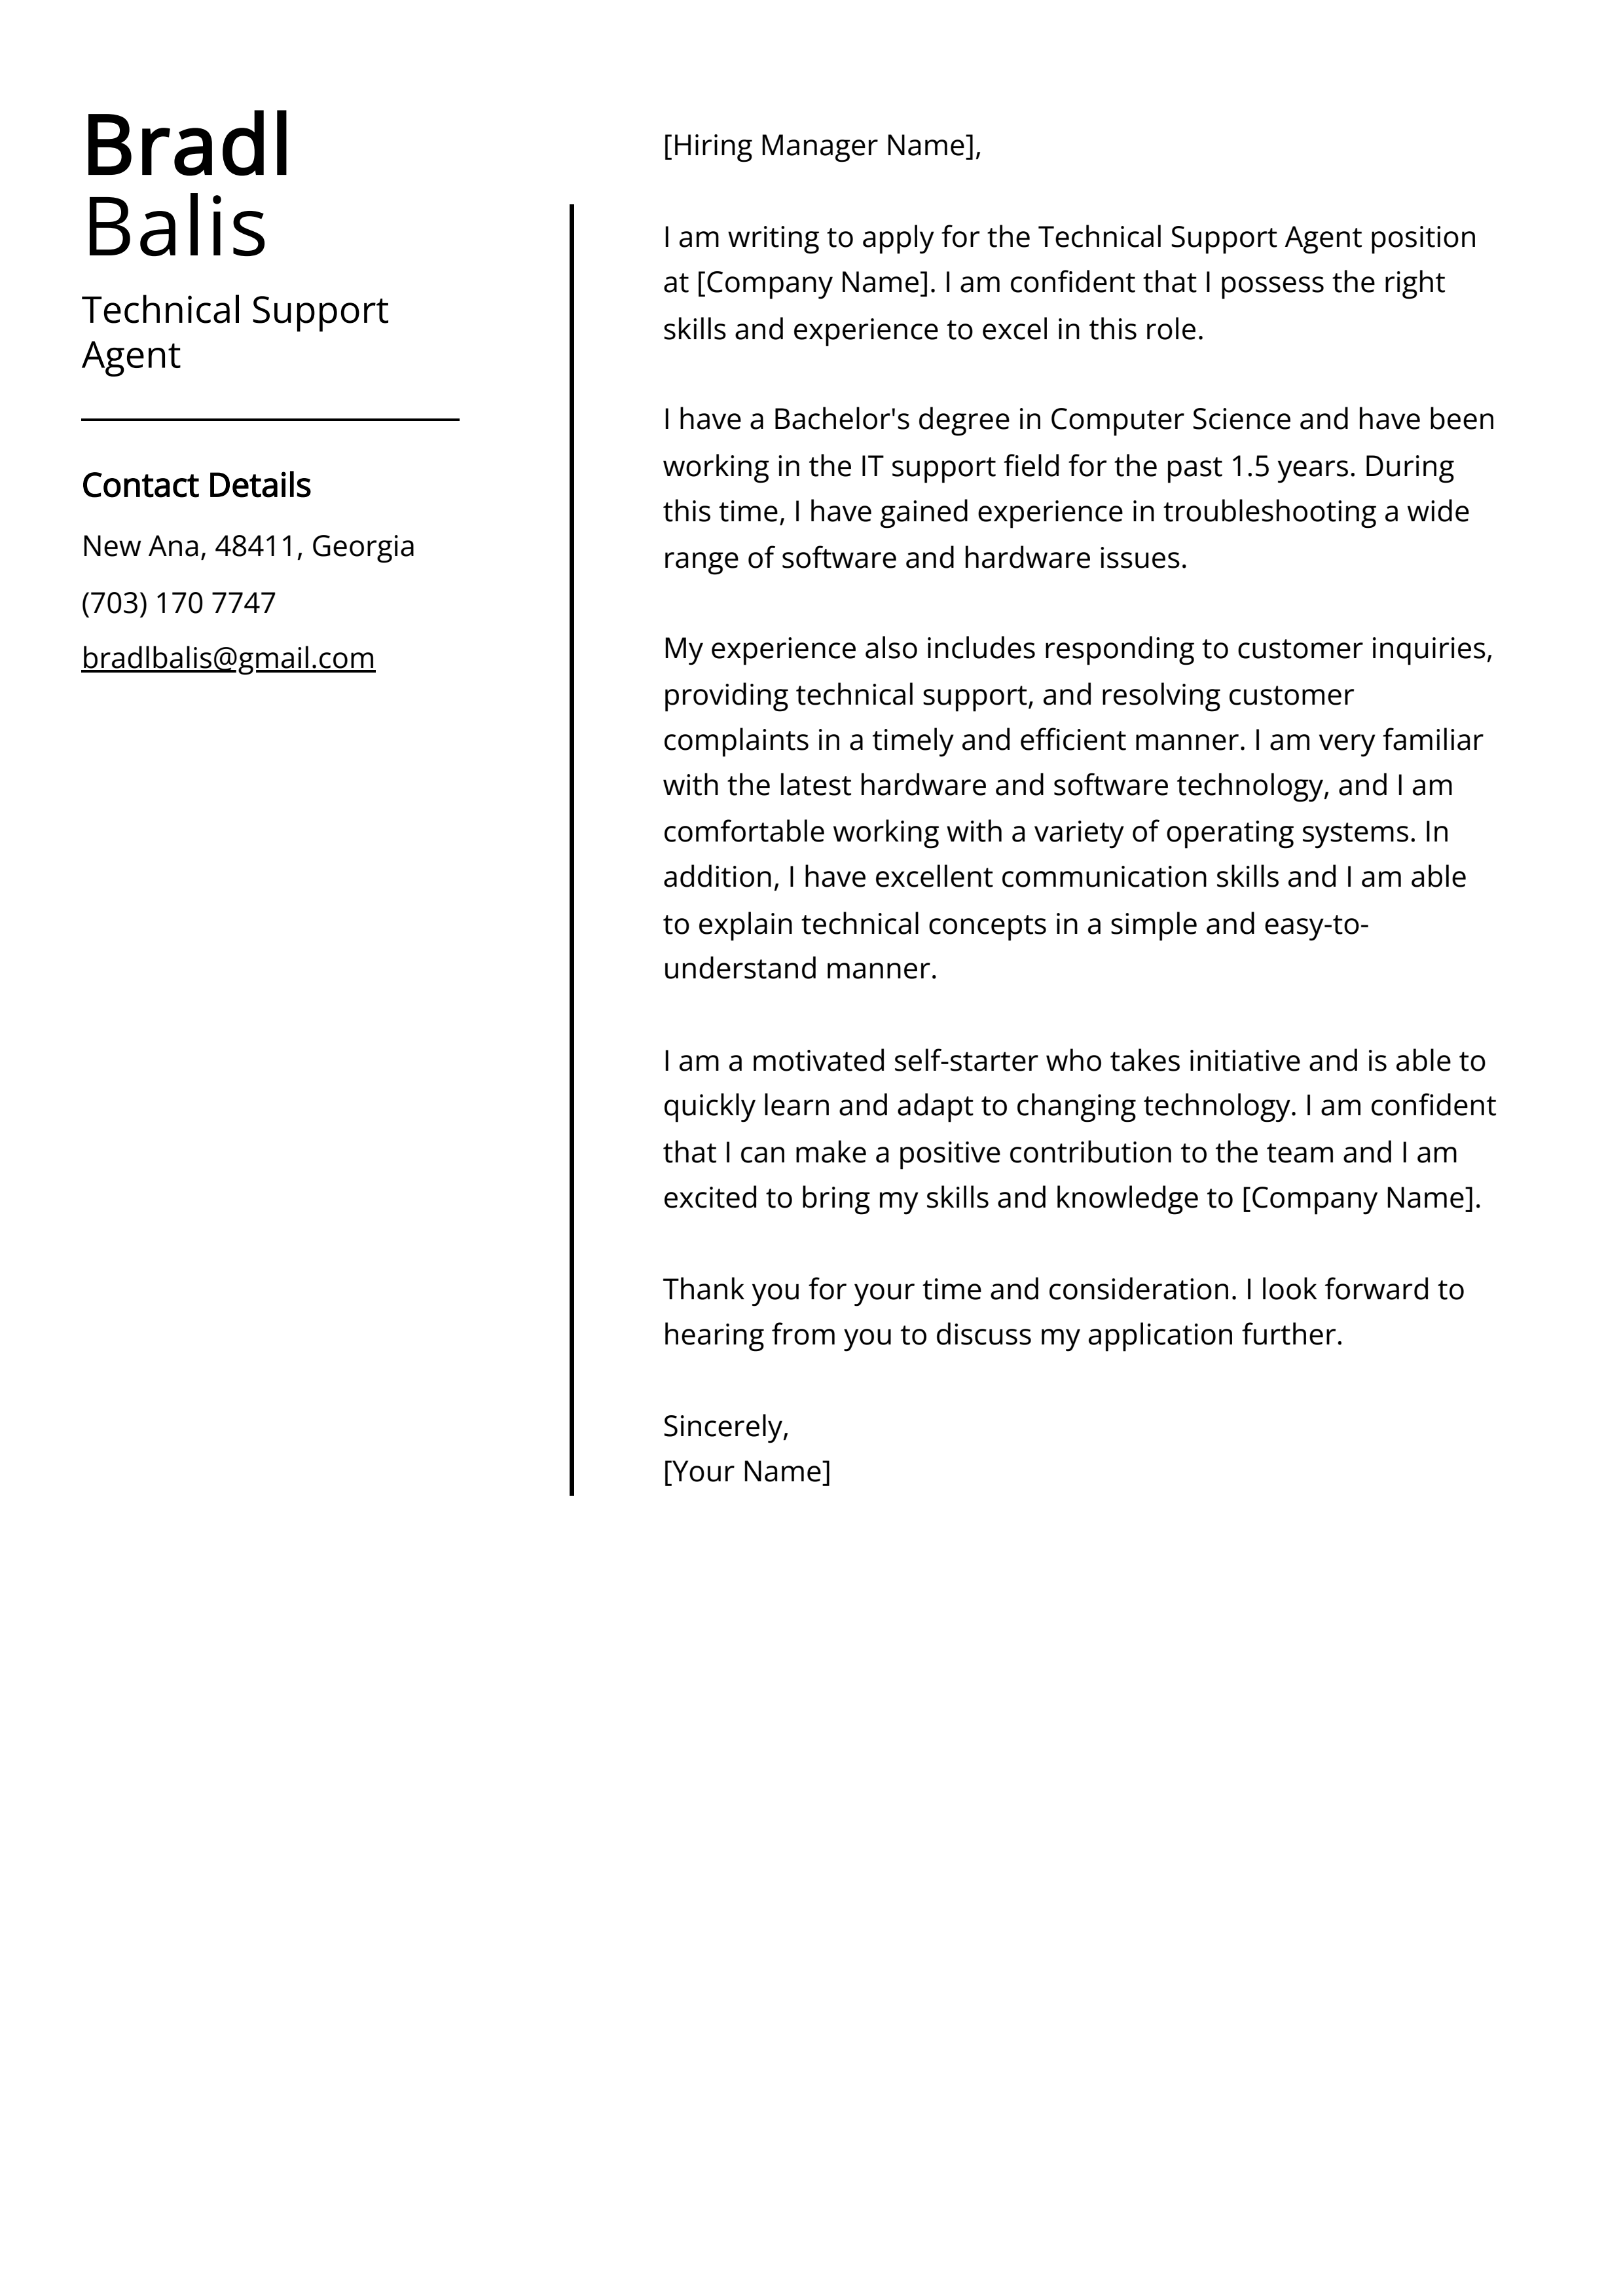 Technical Support Agent Cover Letter Example